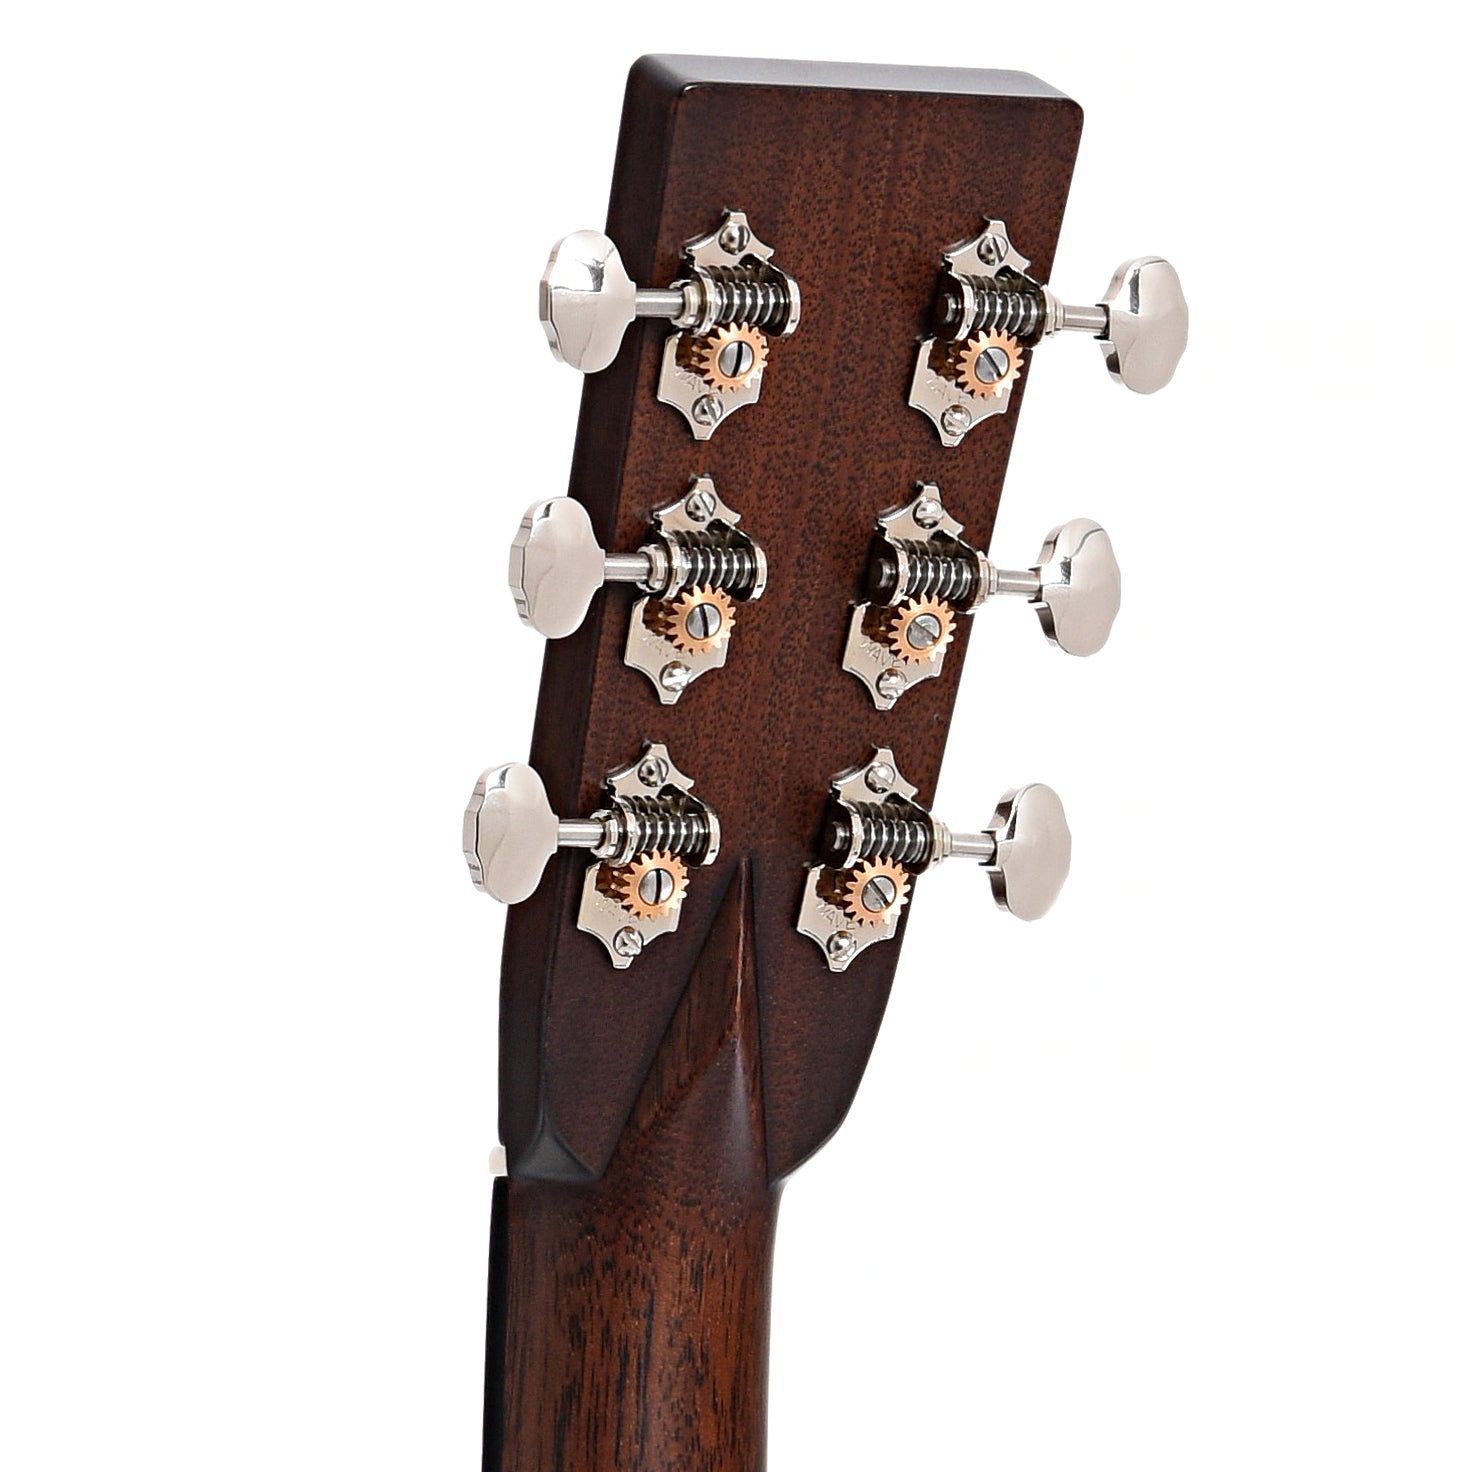 Back headstock of Bourgeois Limited Edition Brazilian Rosewood 000LE Acoustic Guitar